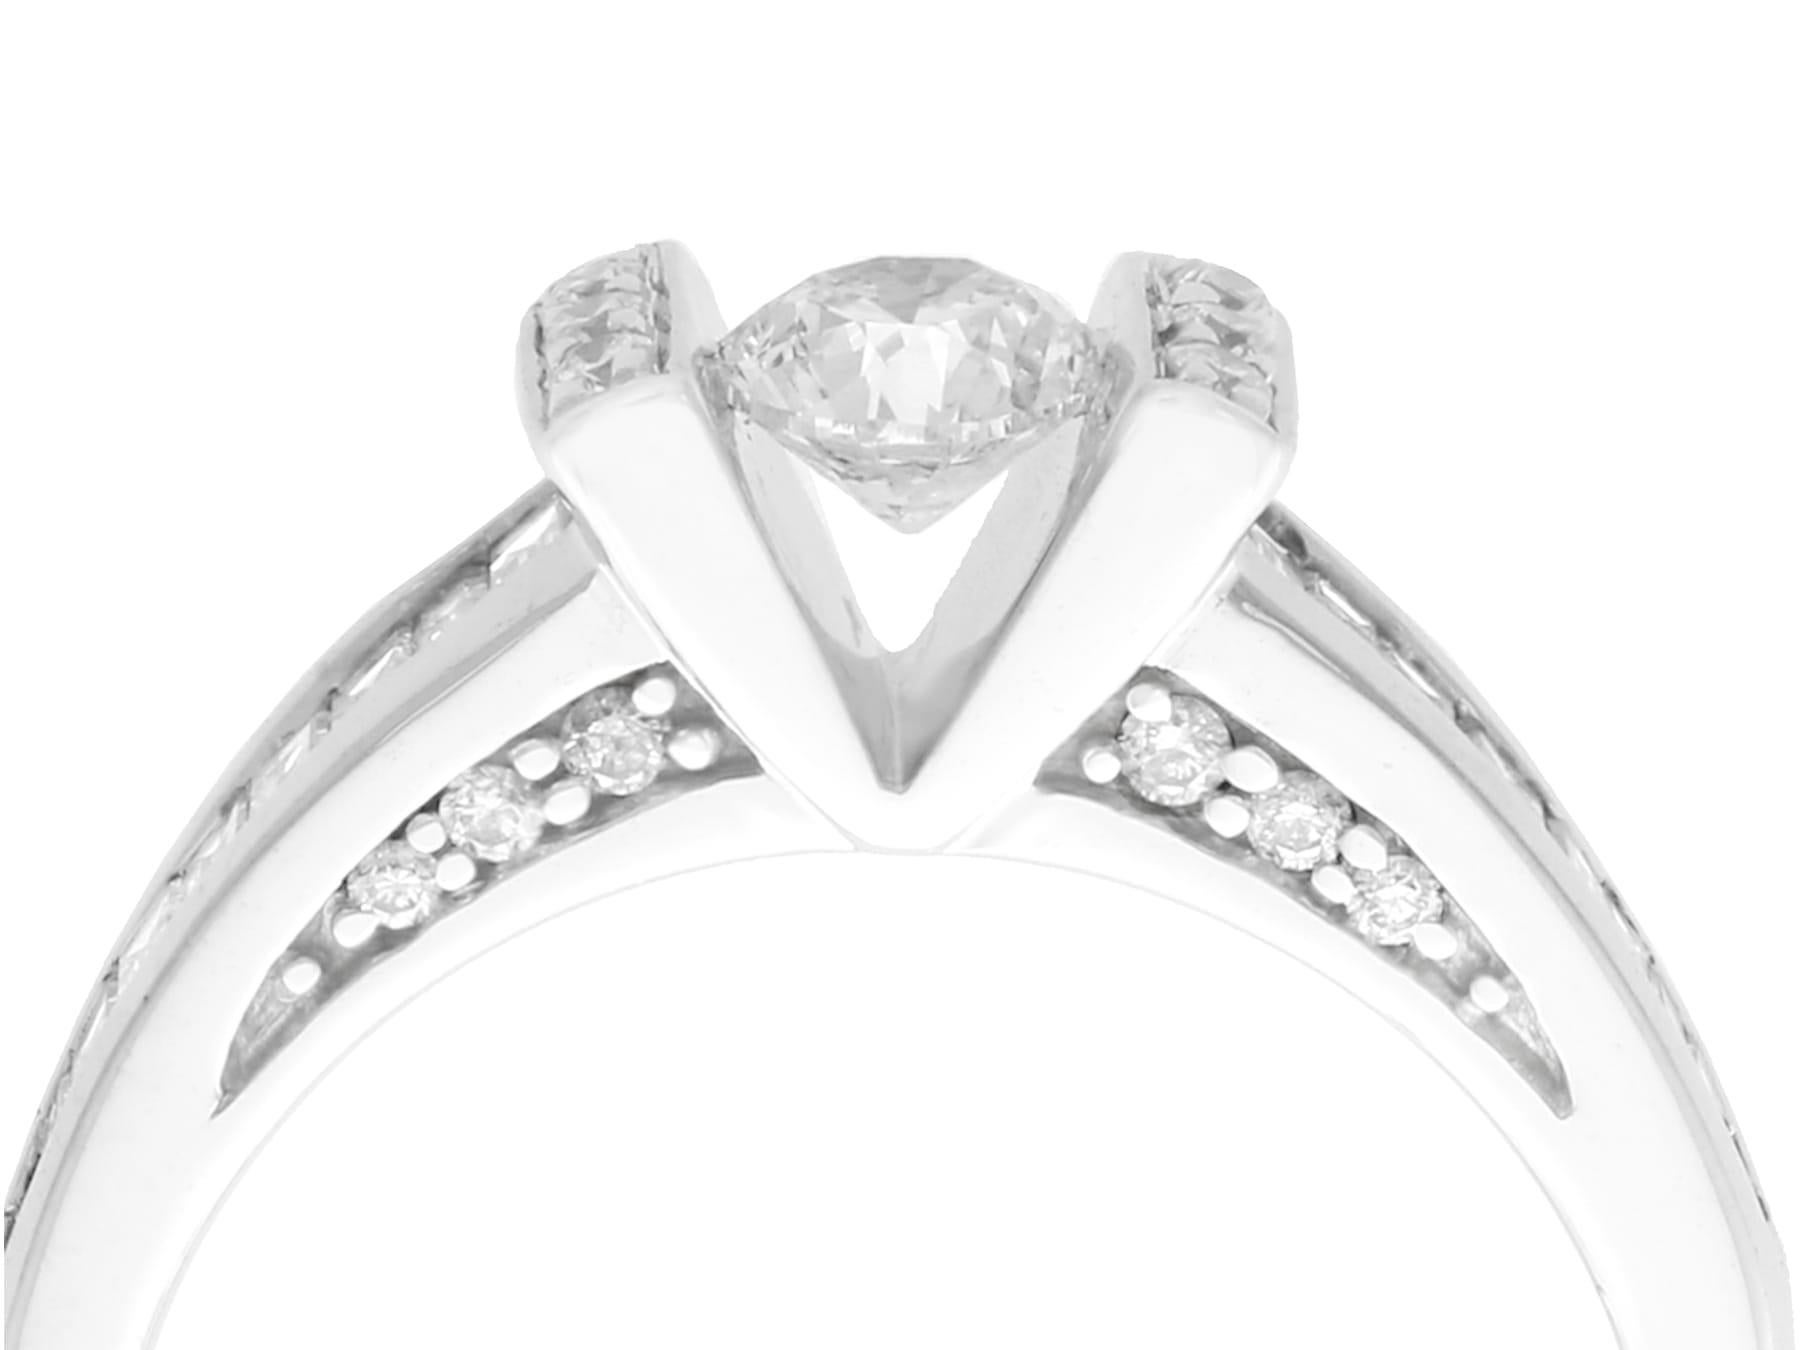 An impressive contemporary 0.72 carat diamond and 14 karat white gold dress ring; part of our diverse diamond jewelry and estate jewelry collections.

This fine and impressive diamond dress ring has been crafted in 14k white gold.

The chevron